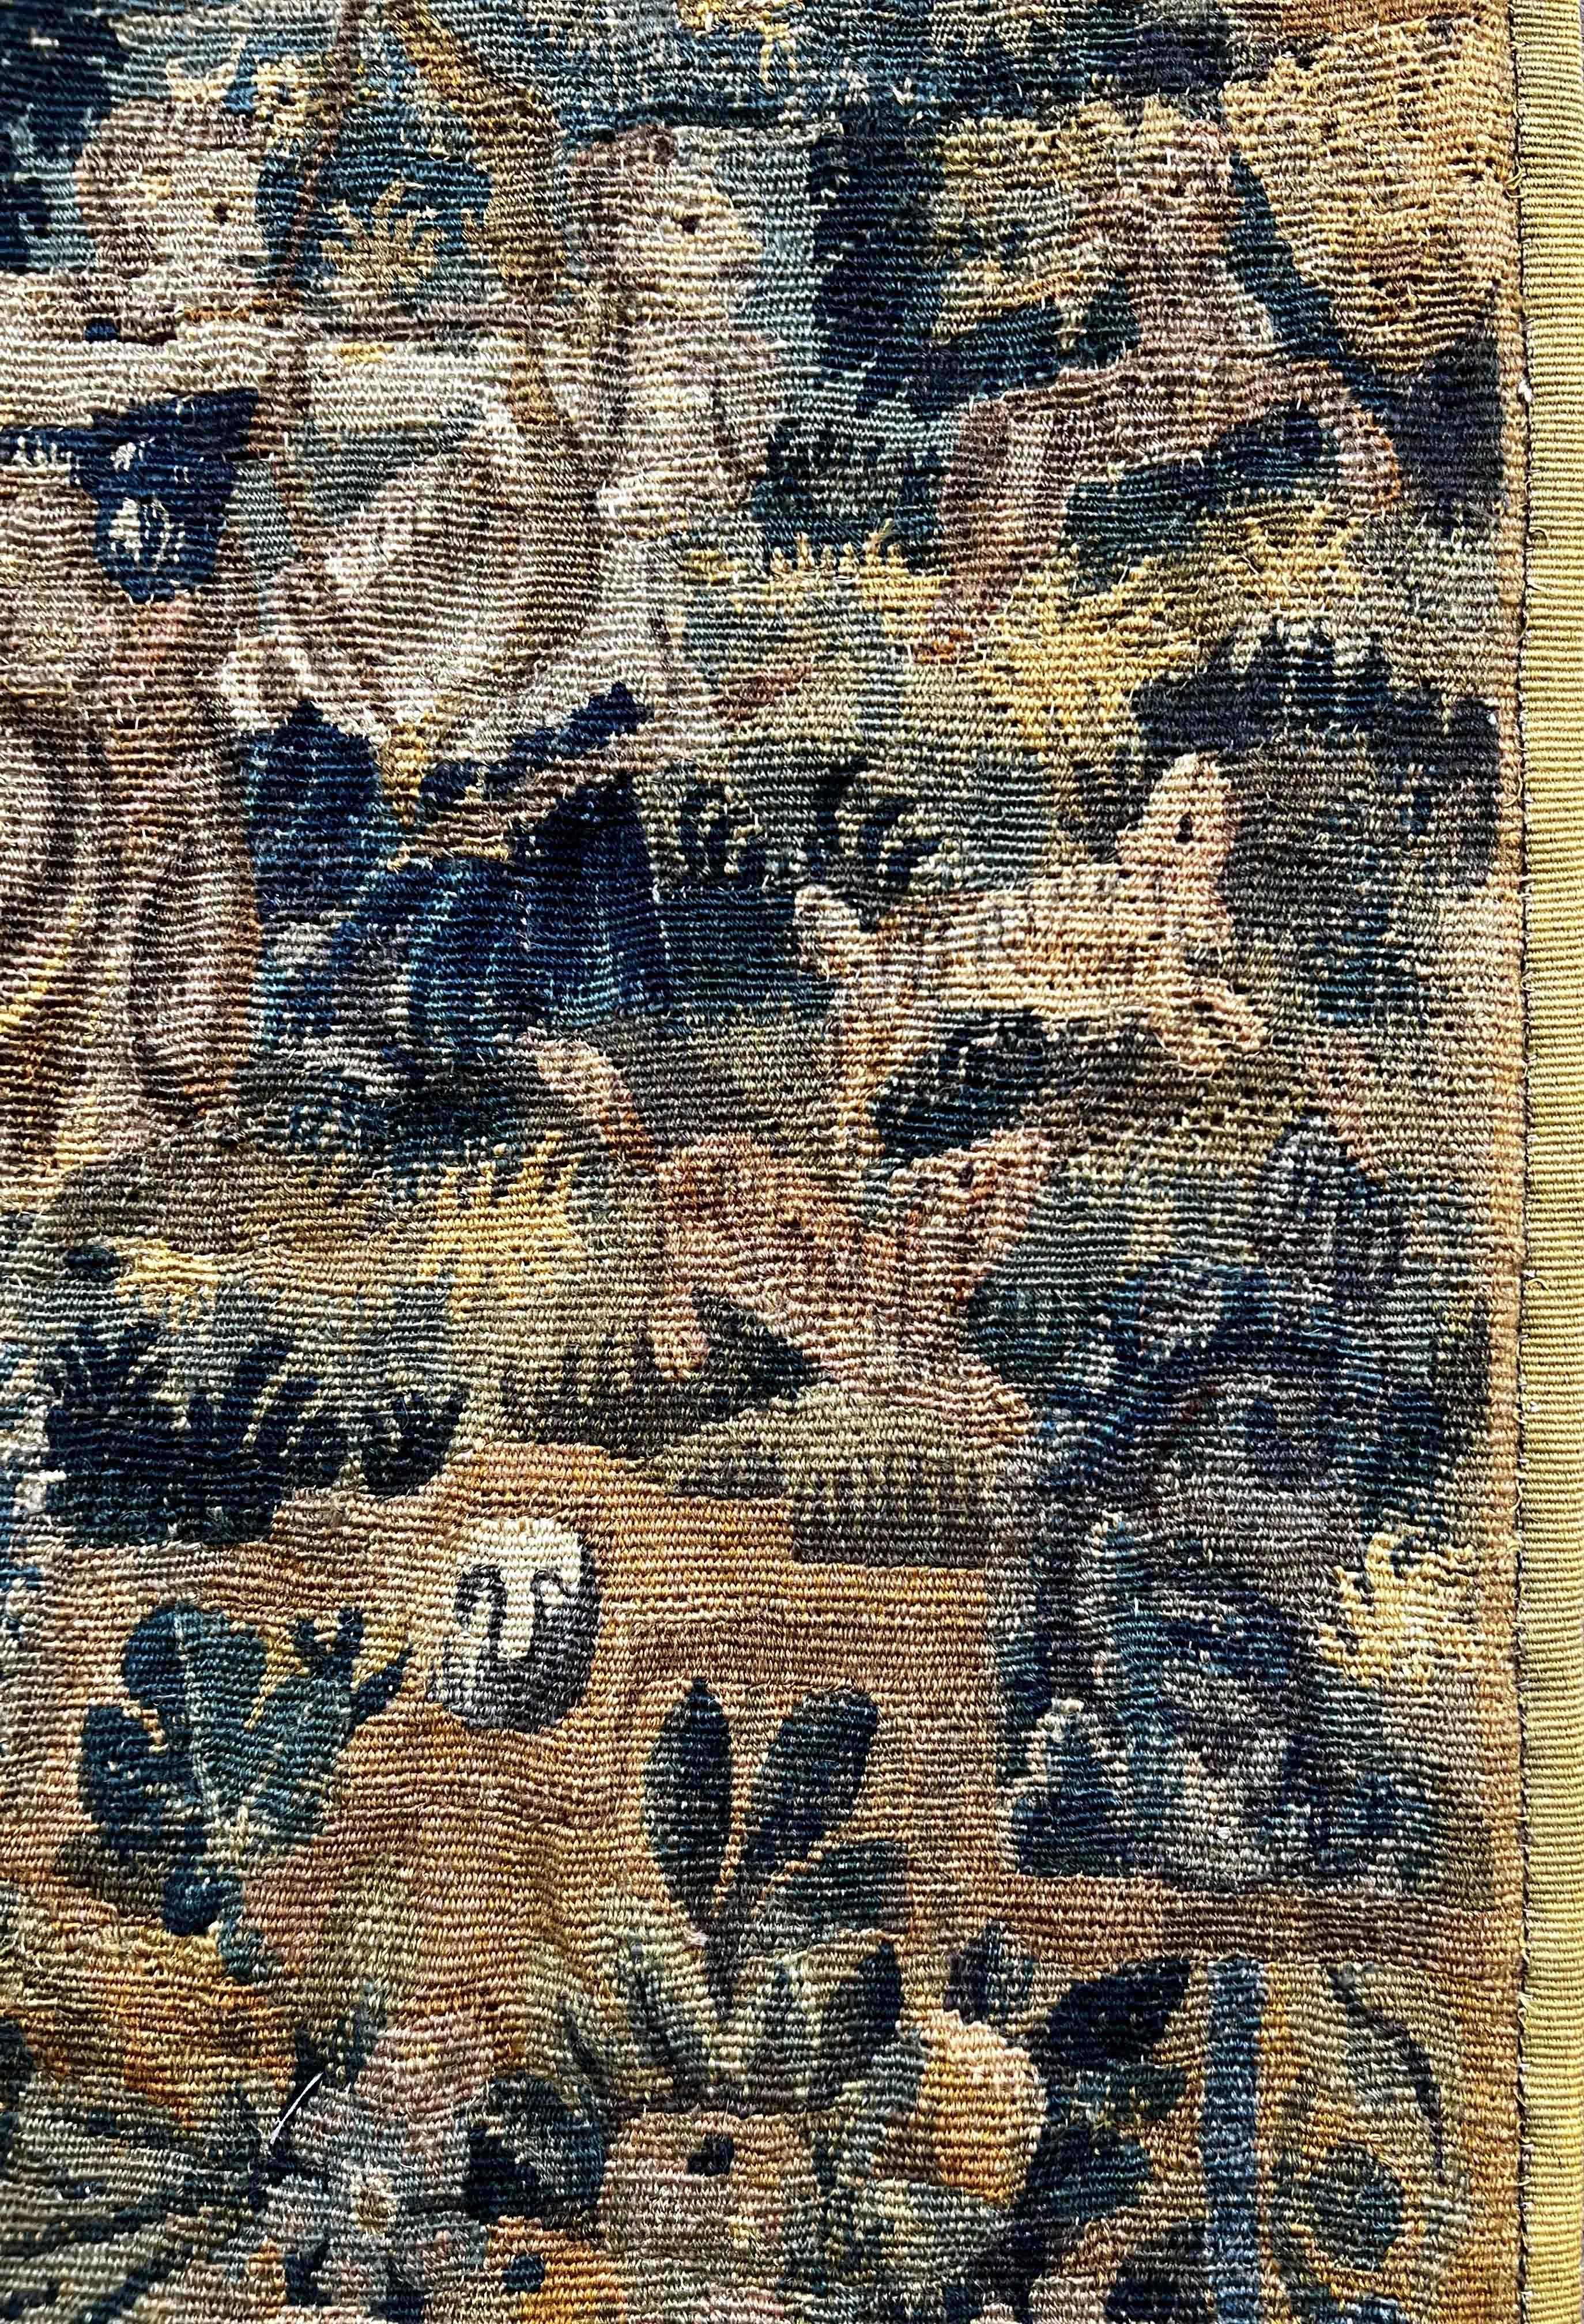 French 17th Century Tapestry from Flanders, N° 1184